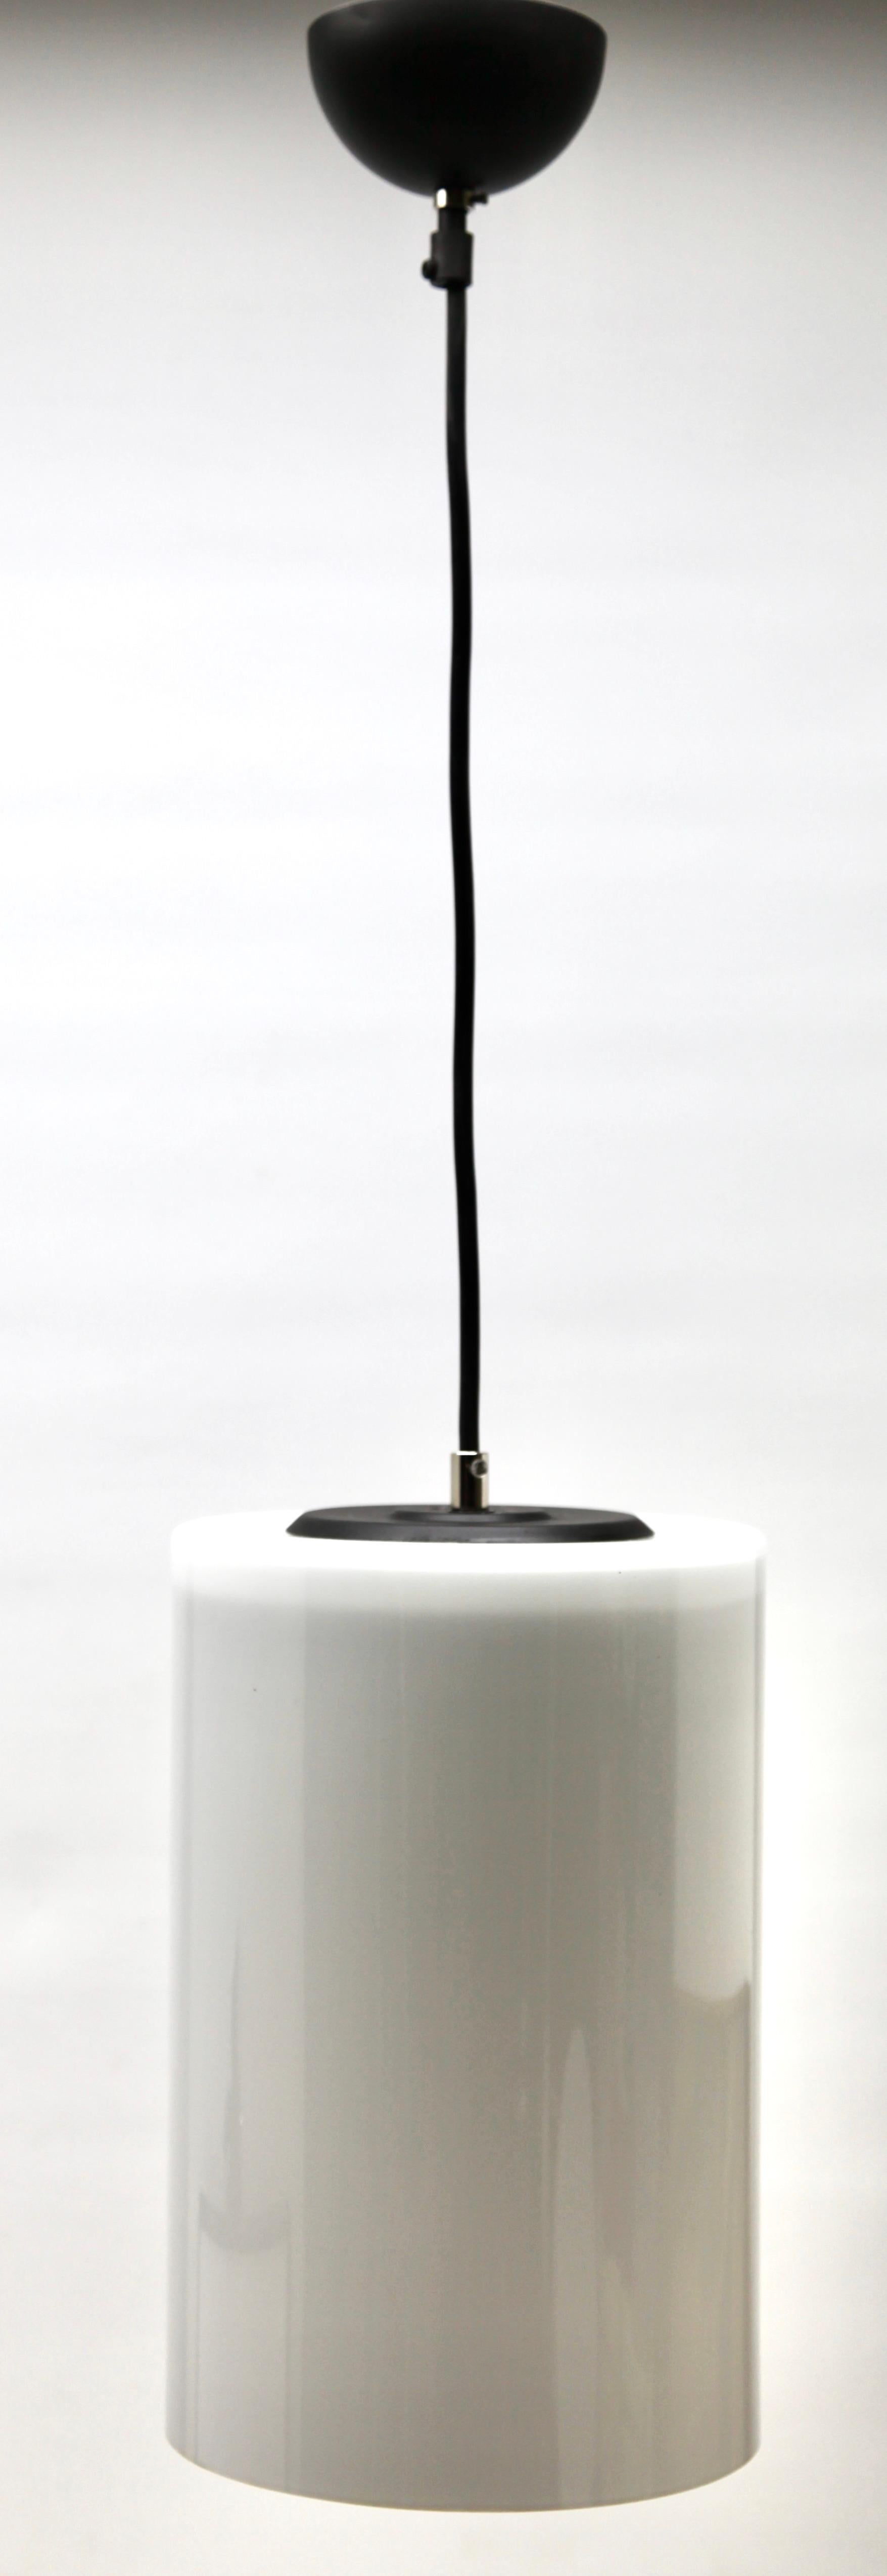 Mid-20th Century Pendant Lamp with a Cylinder Shape Opaline Shade, 1930s, Netherlands For Sale